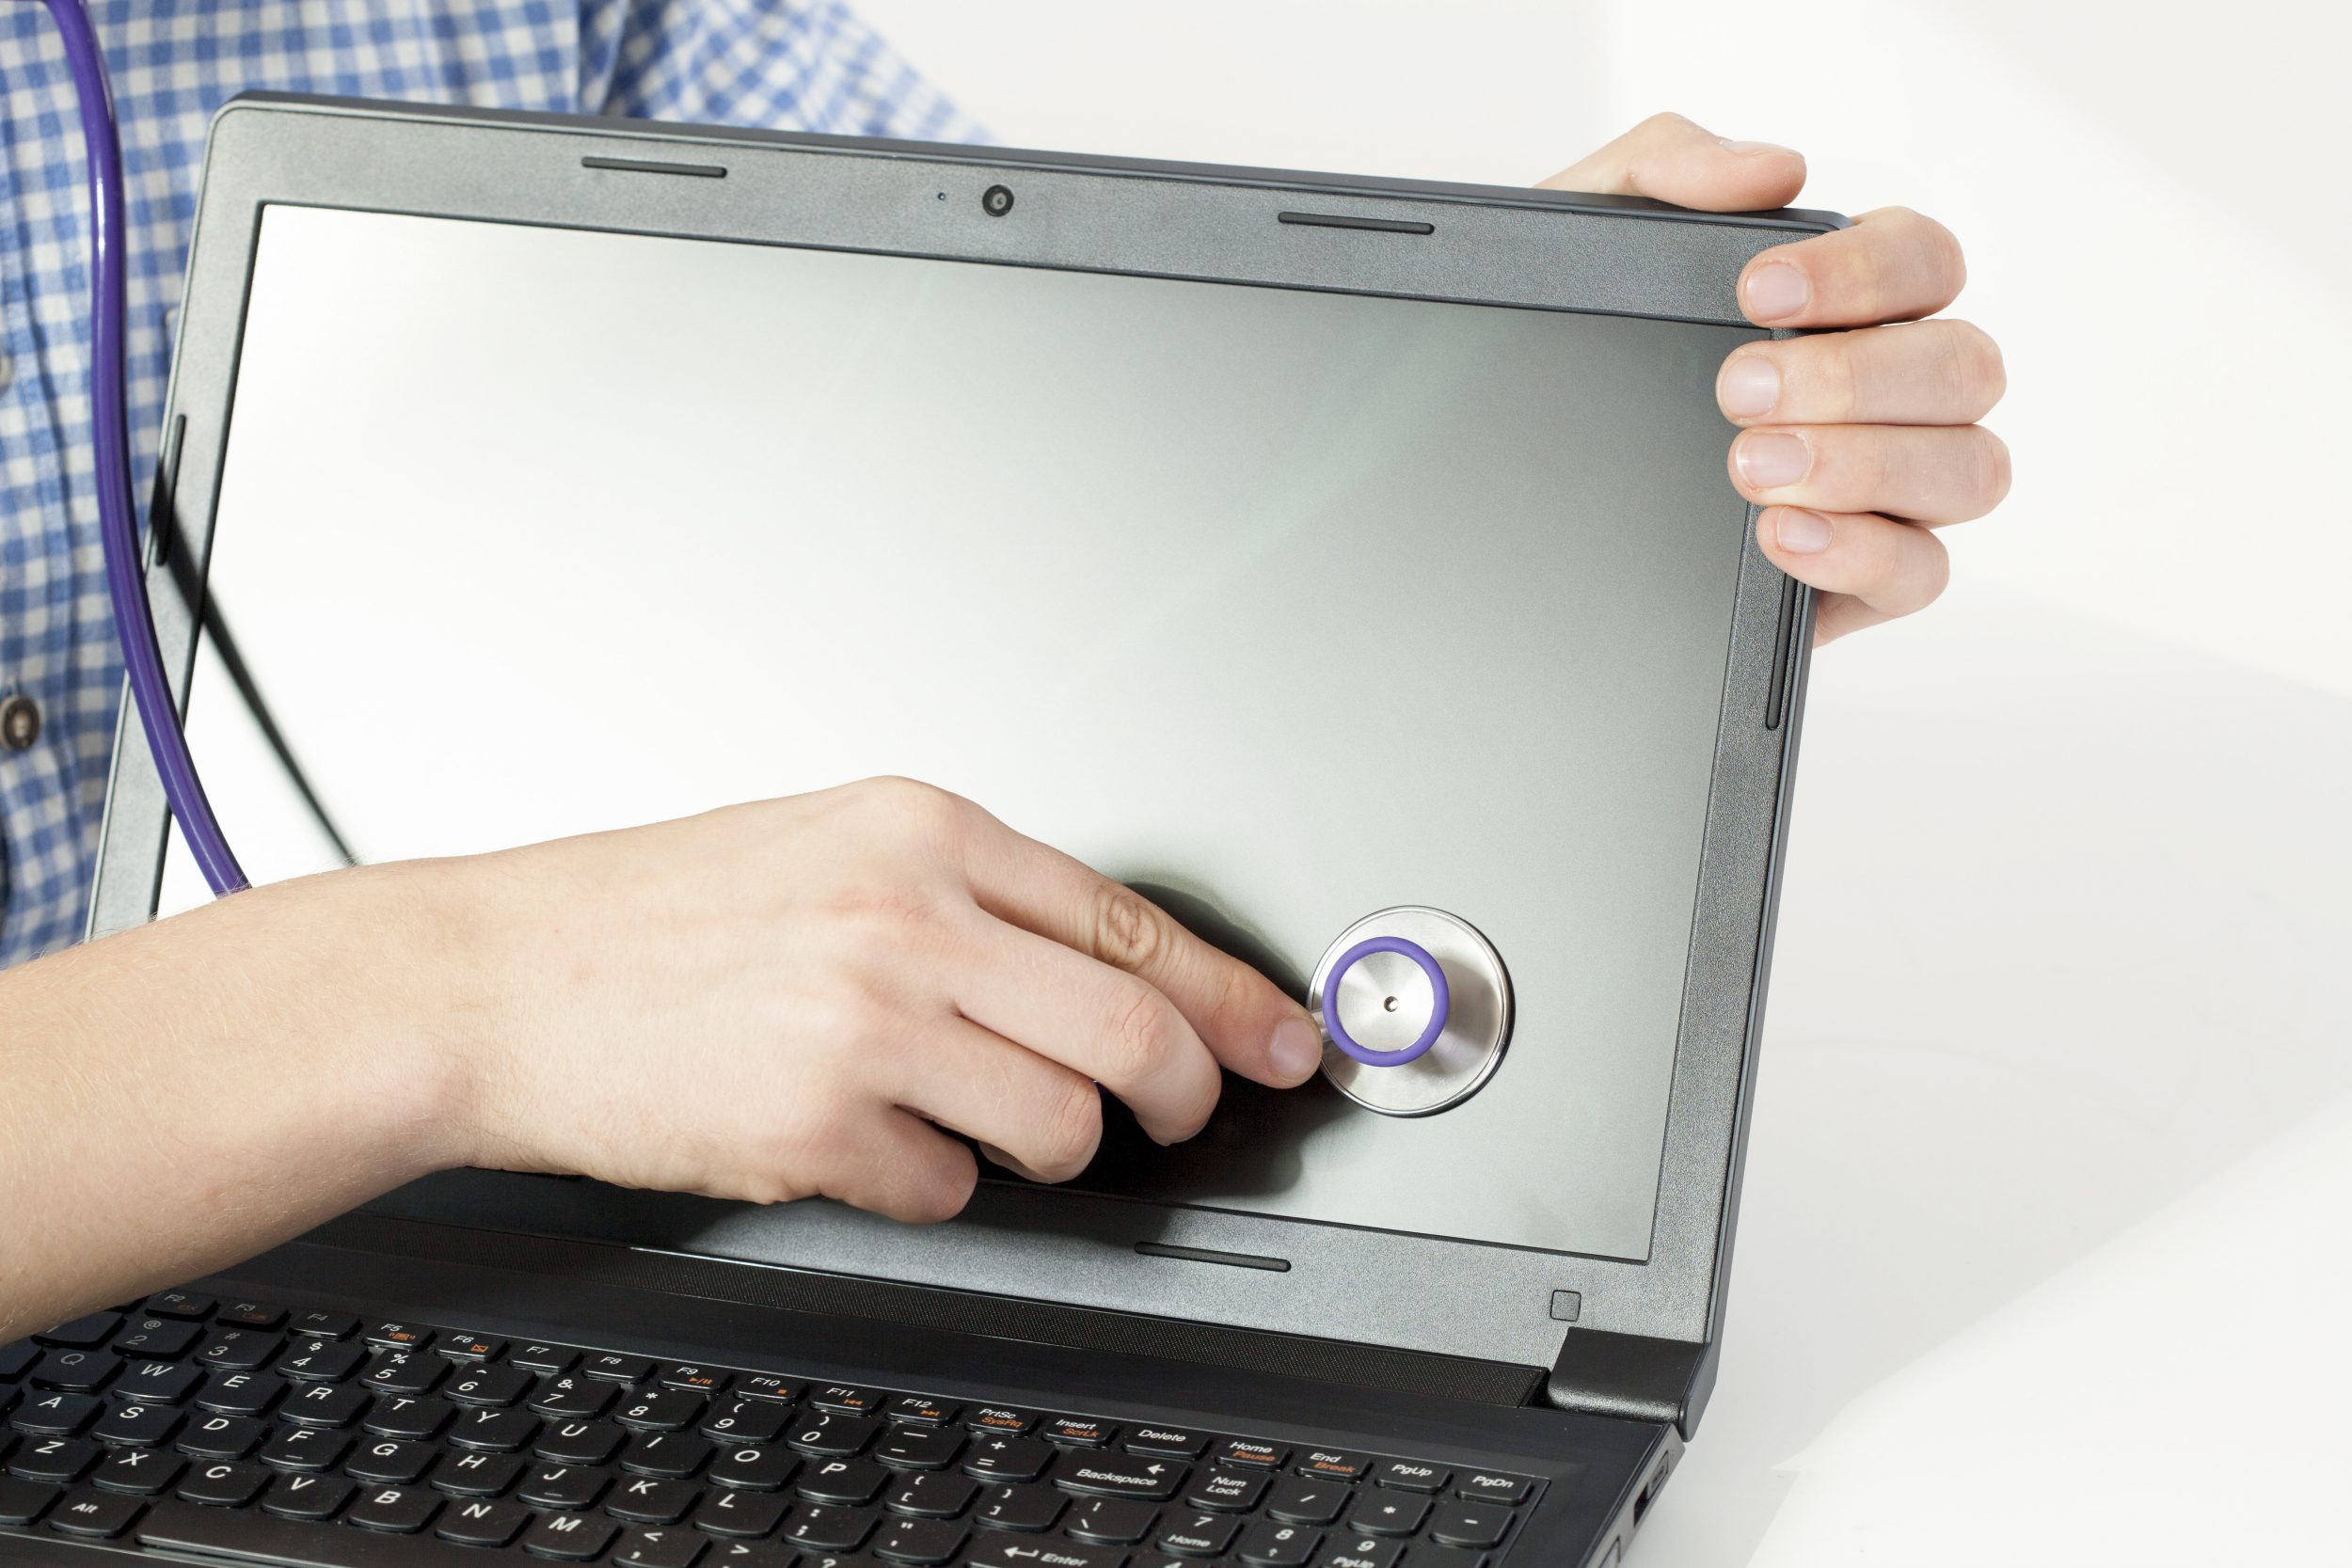 Close-up of medical stethoscope on the screen and why may need rugged computers as cure